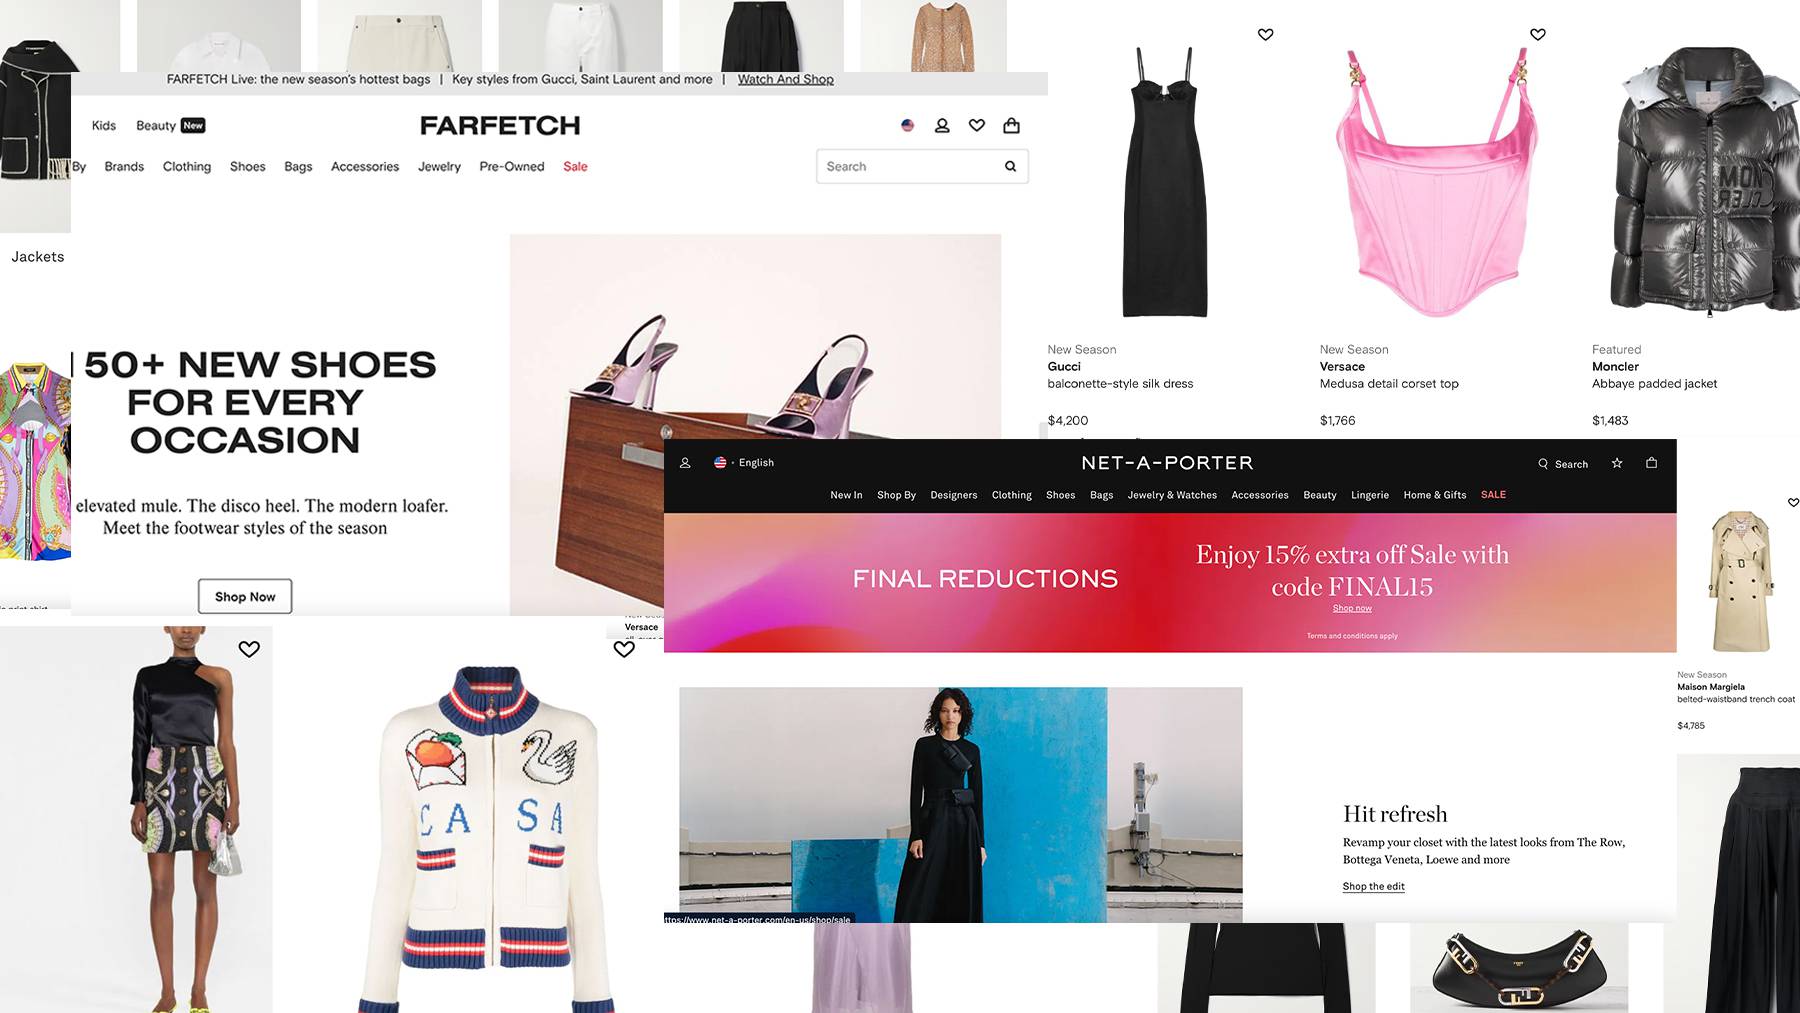 Farfetch will acquire a 47.5 percent stake in Yoox Net-a-Porter from Cartier-owner Richemont, as part of a complex agreement that contains provisions for a full acquisition within a few years.